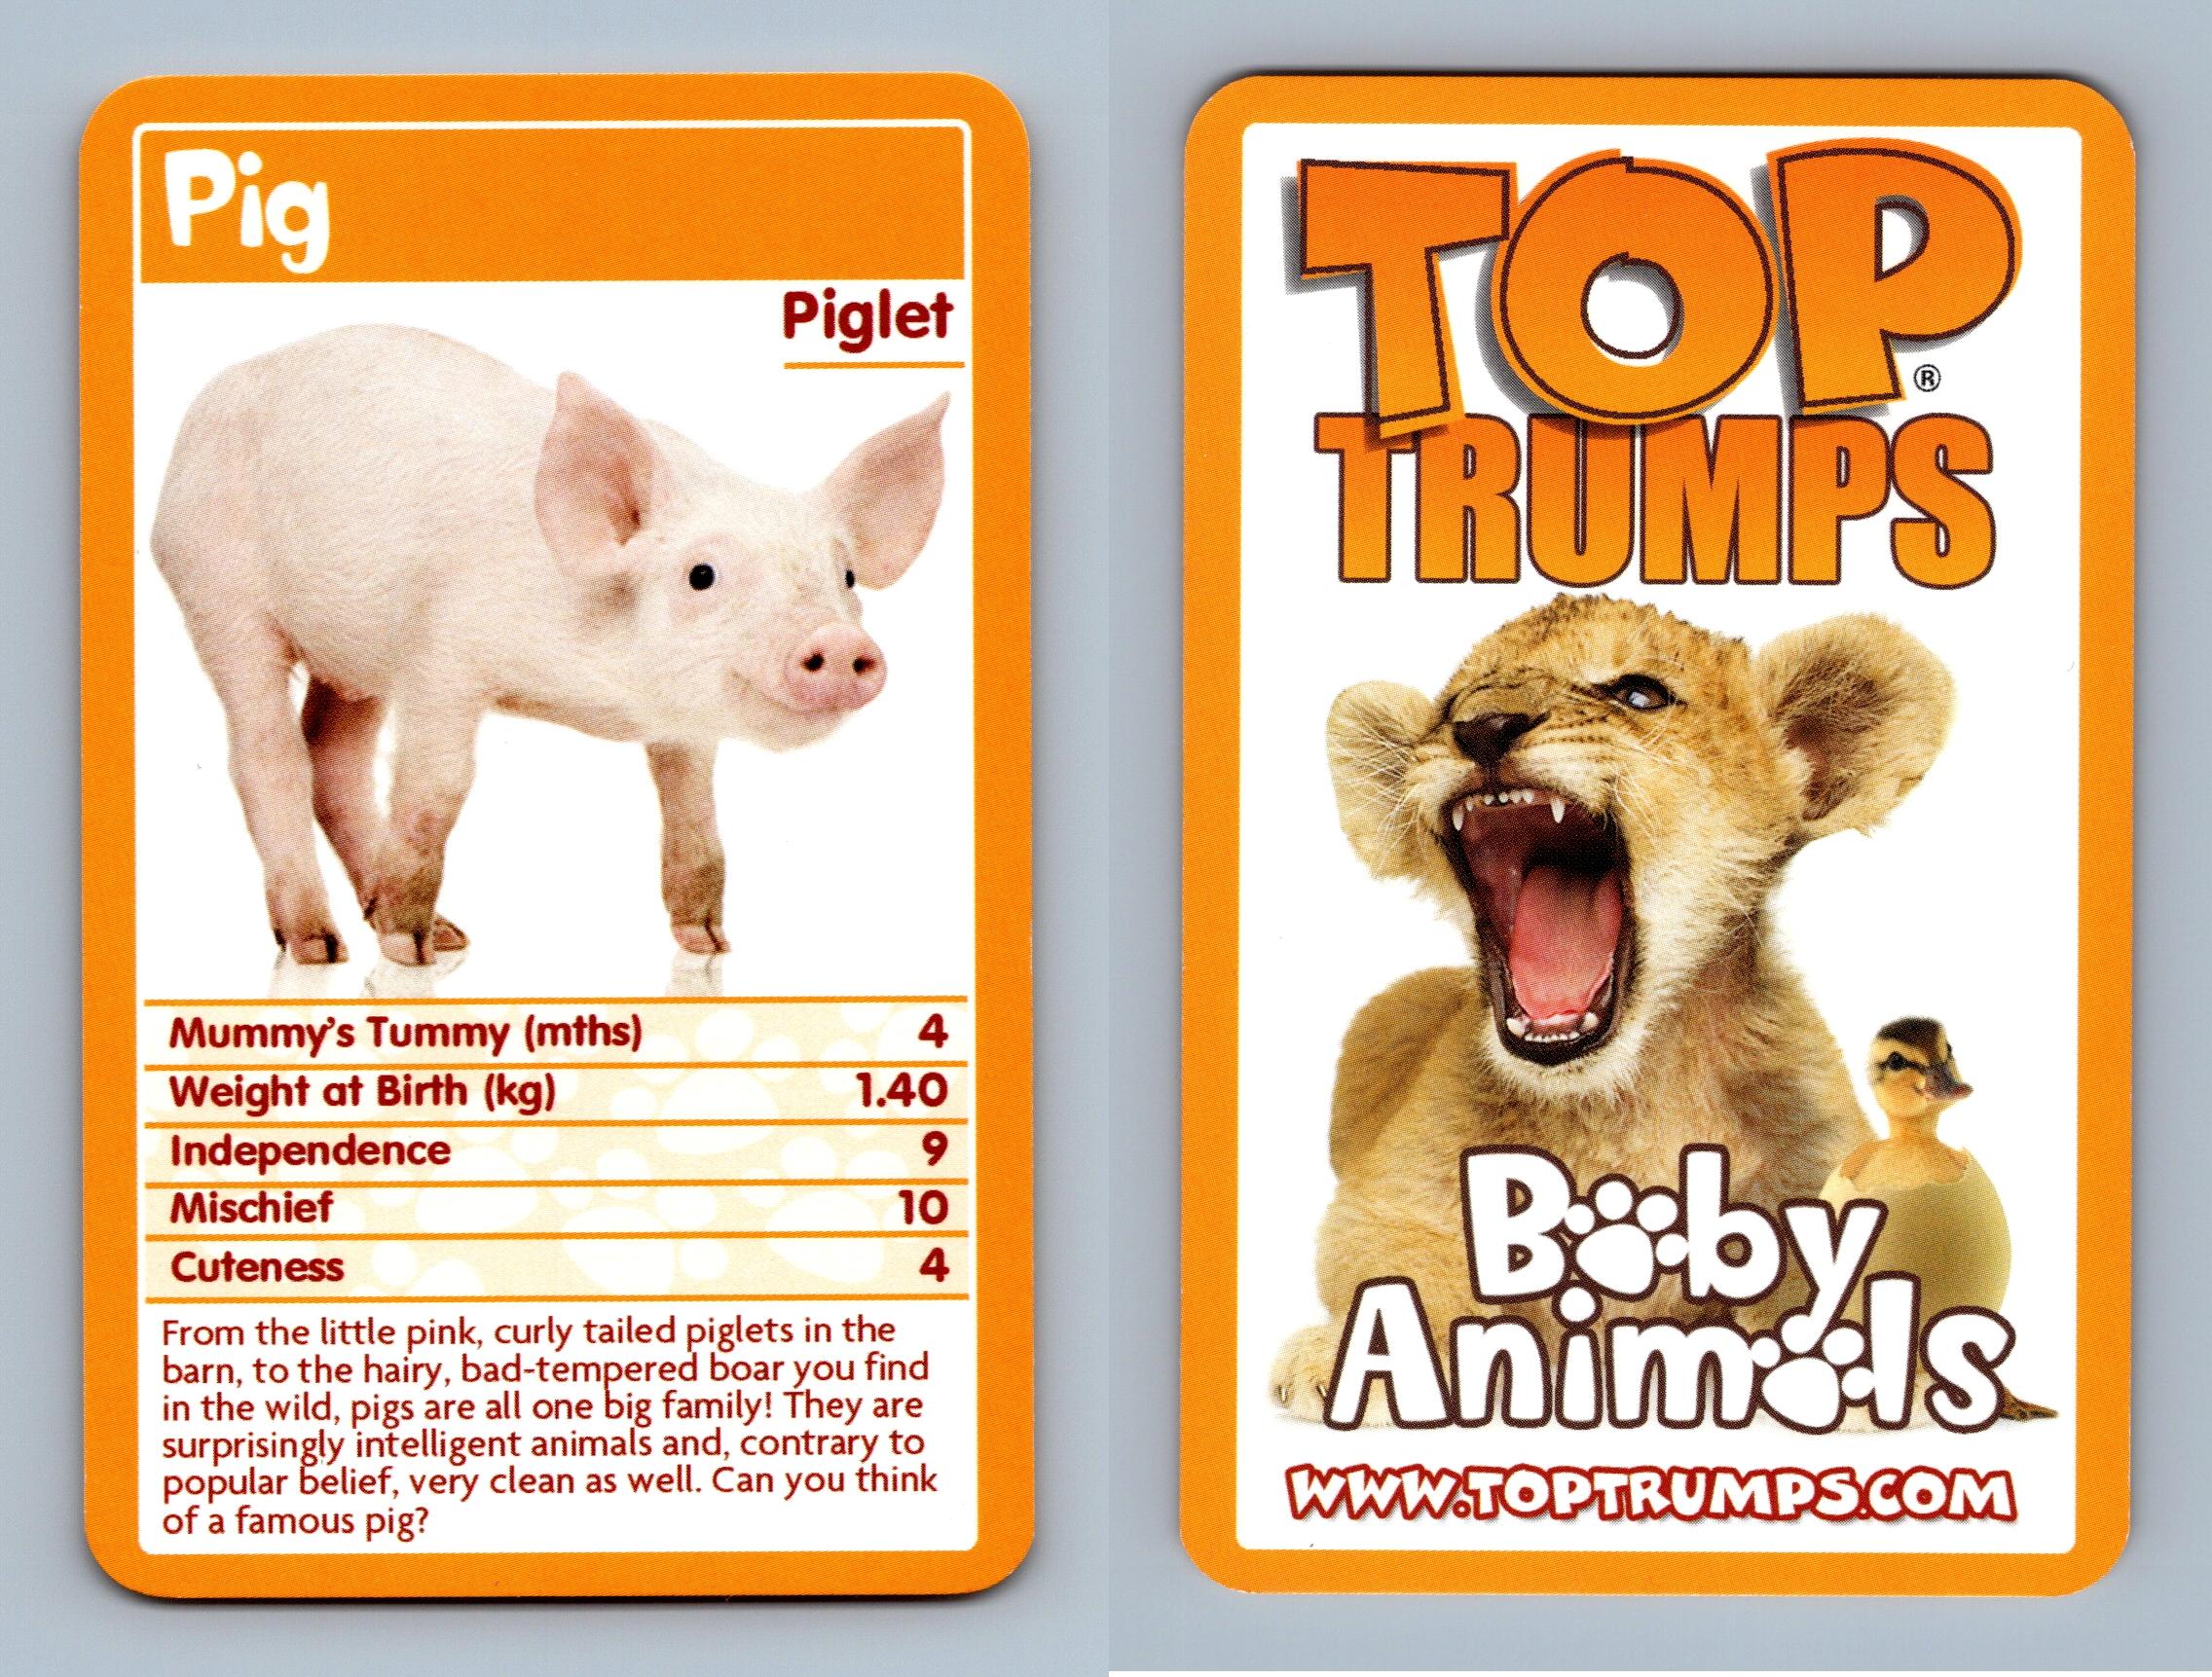 Pig / Piglet - Baby Animals 2009 Top Trumps Card - Picture 1 of 1